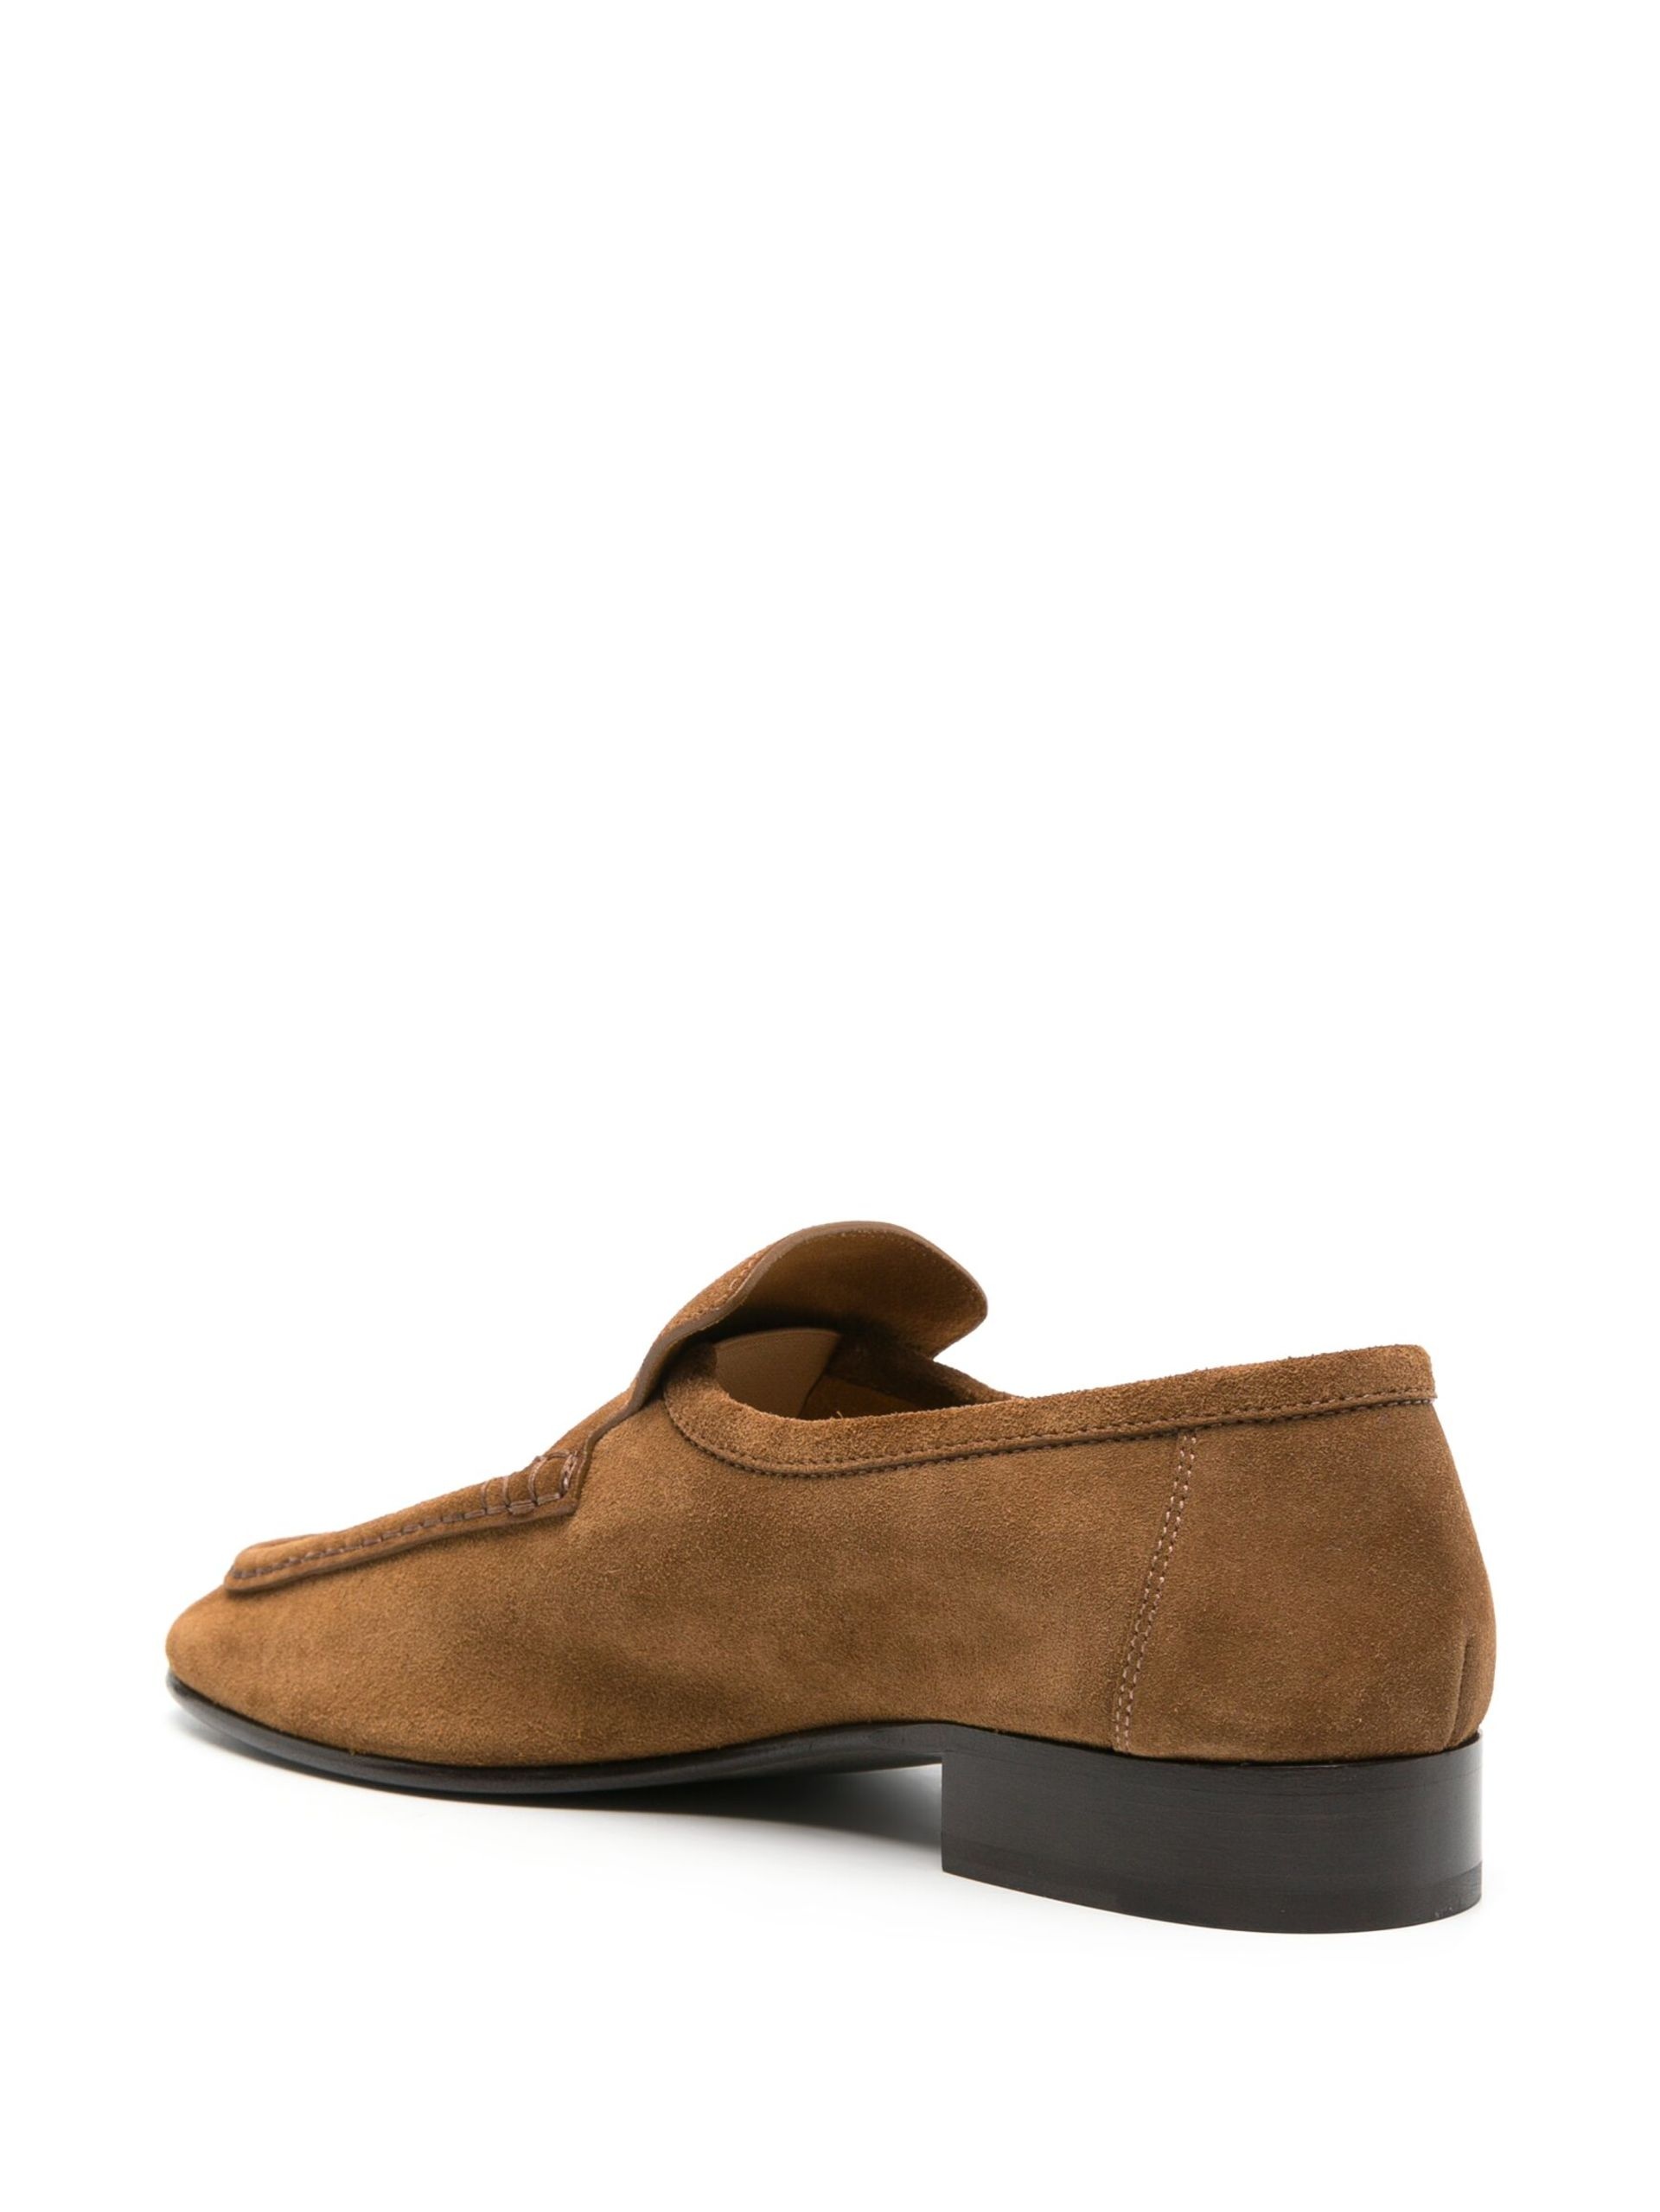 Brown Suede Loafers - 3